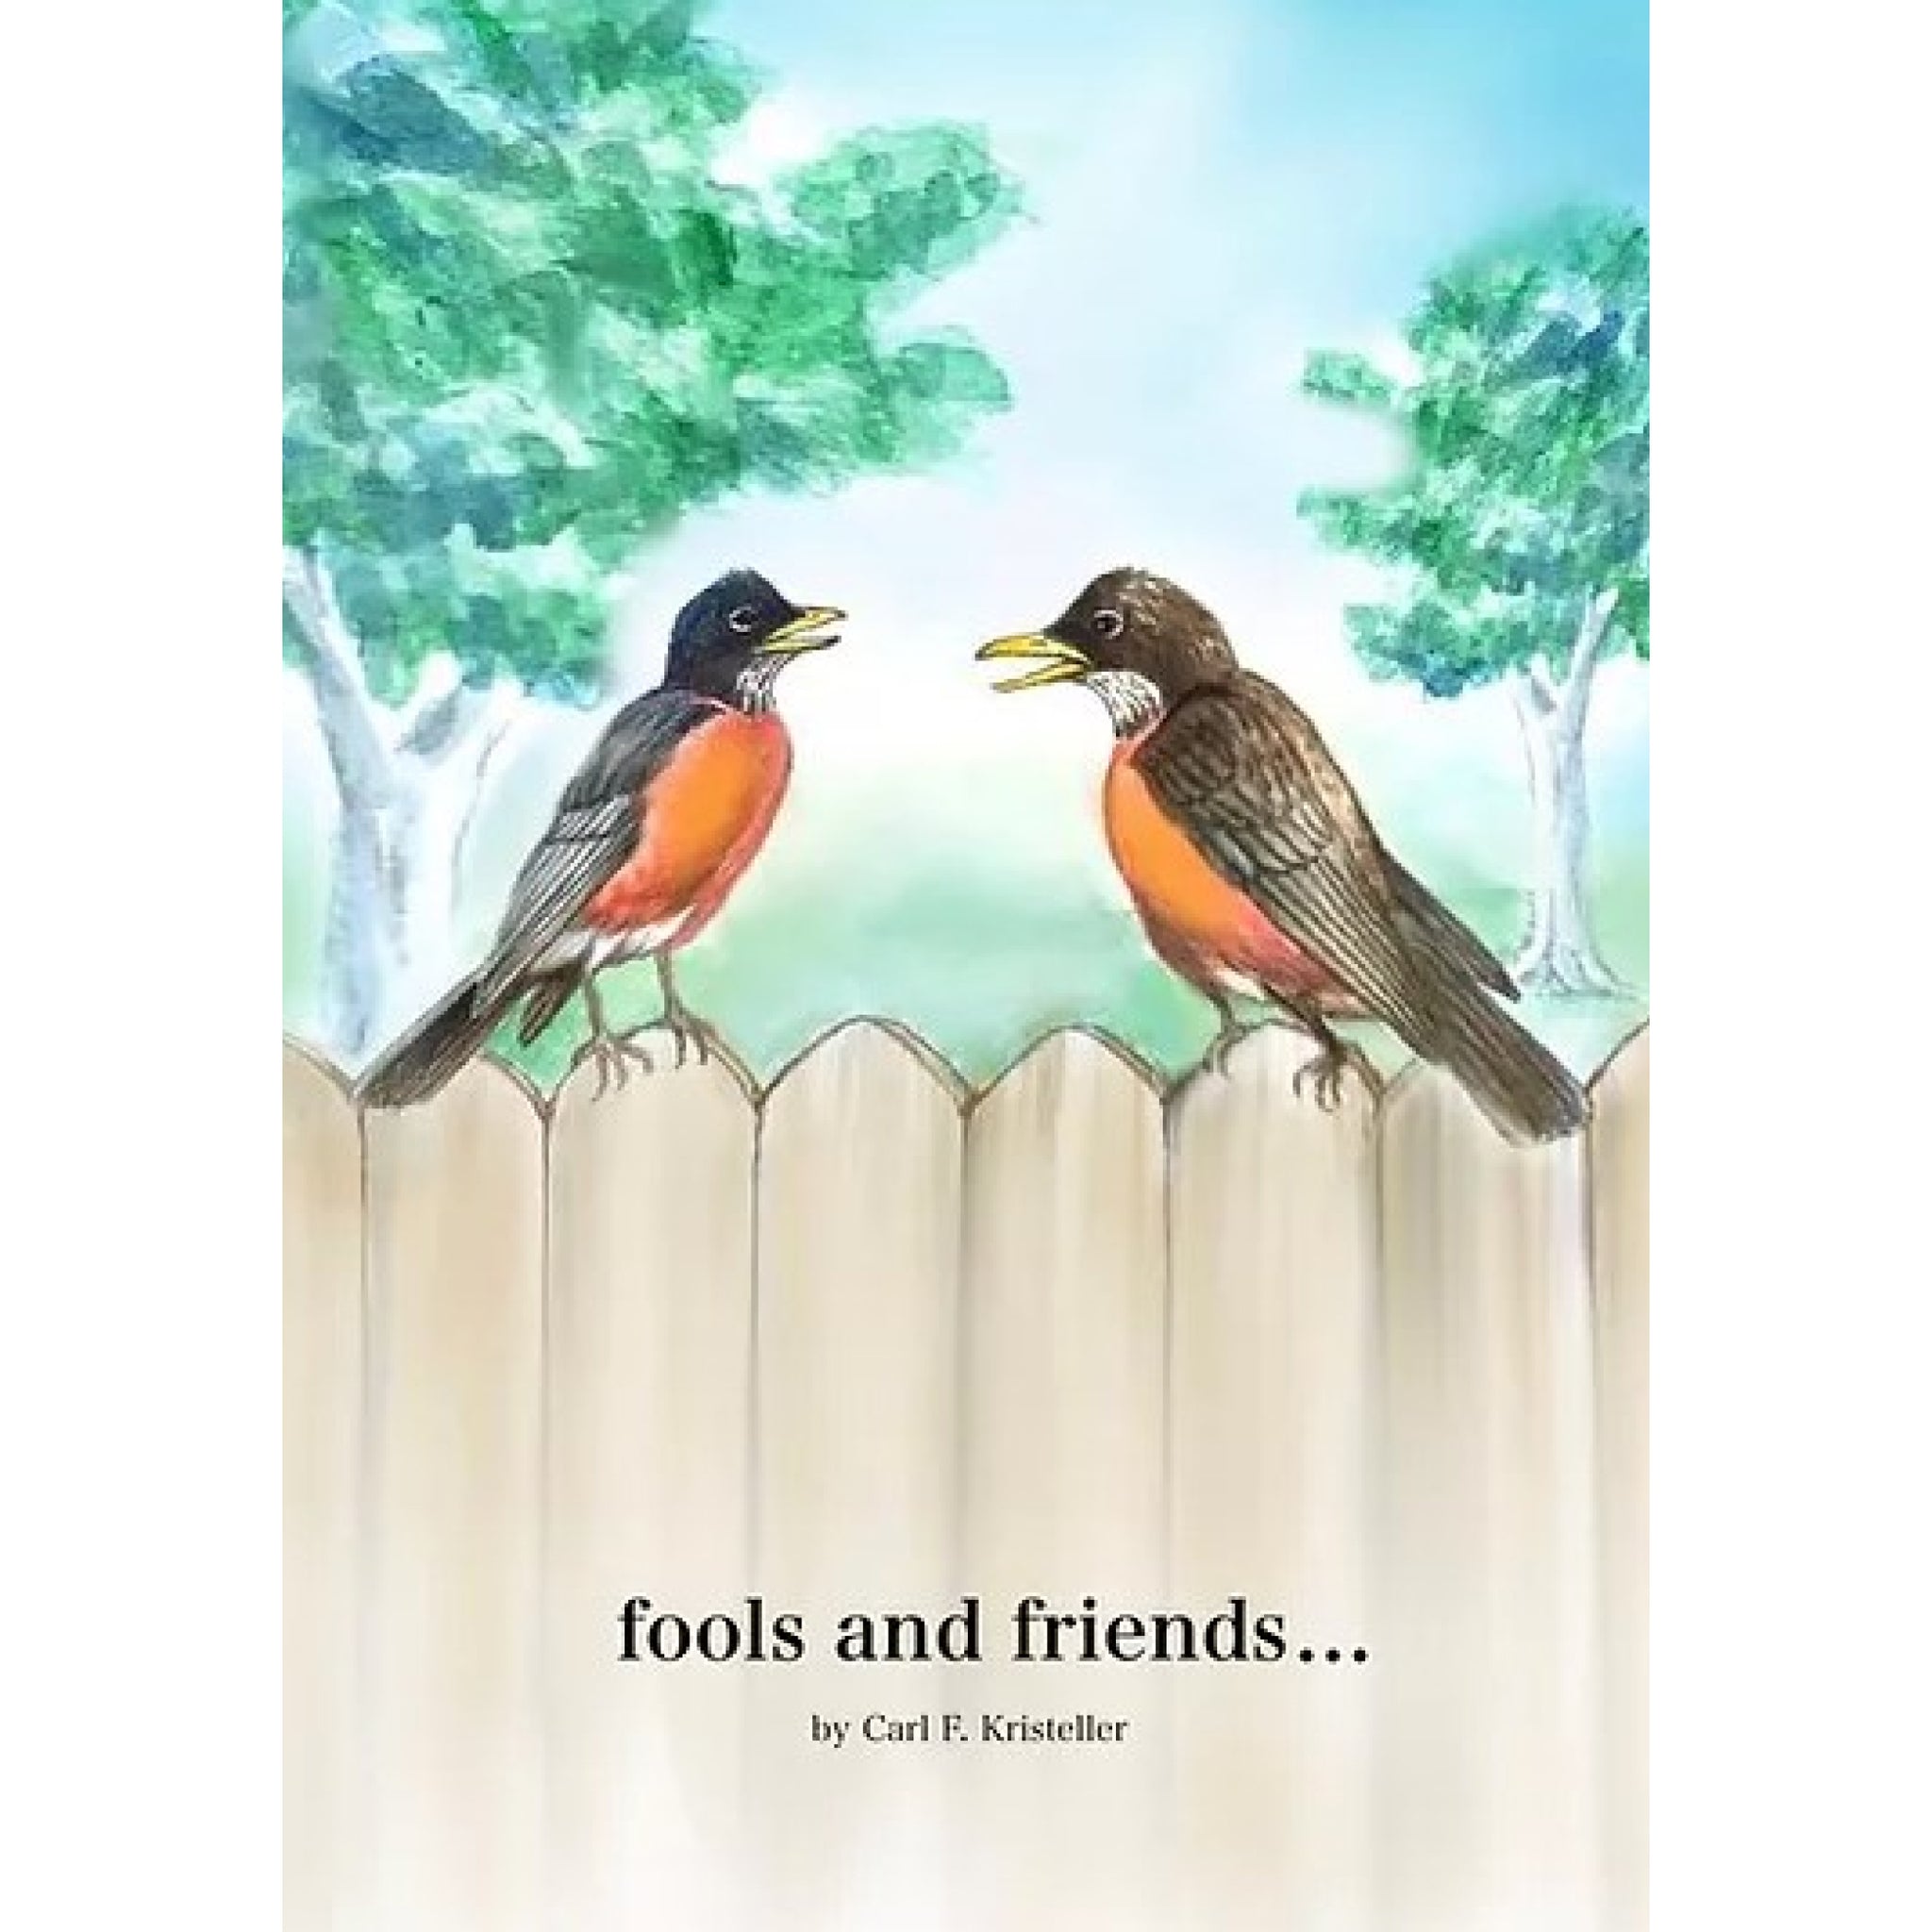 "fools and friends..." (Book) by Carl F. Kristeller